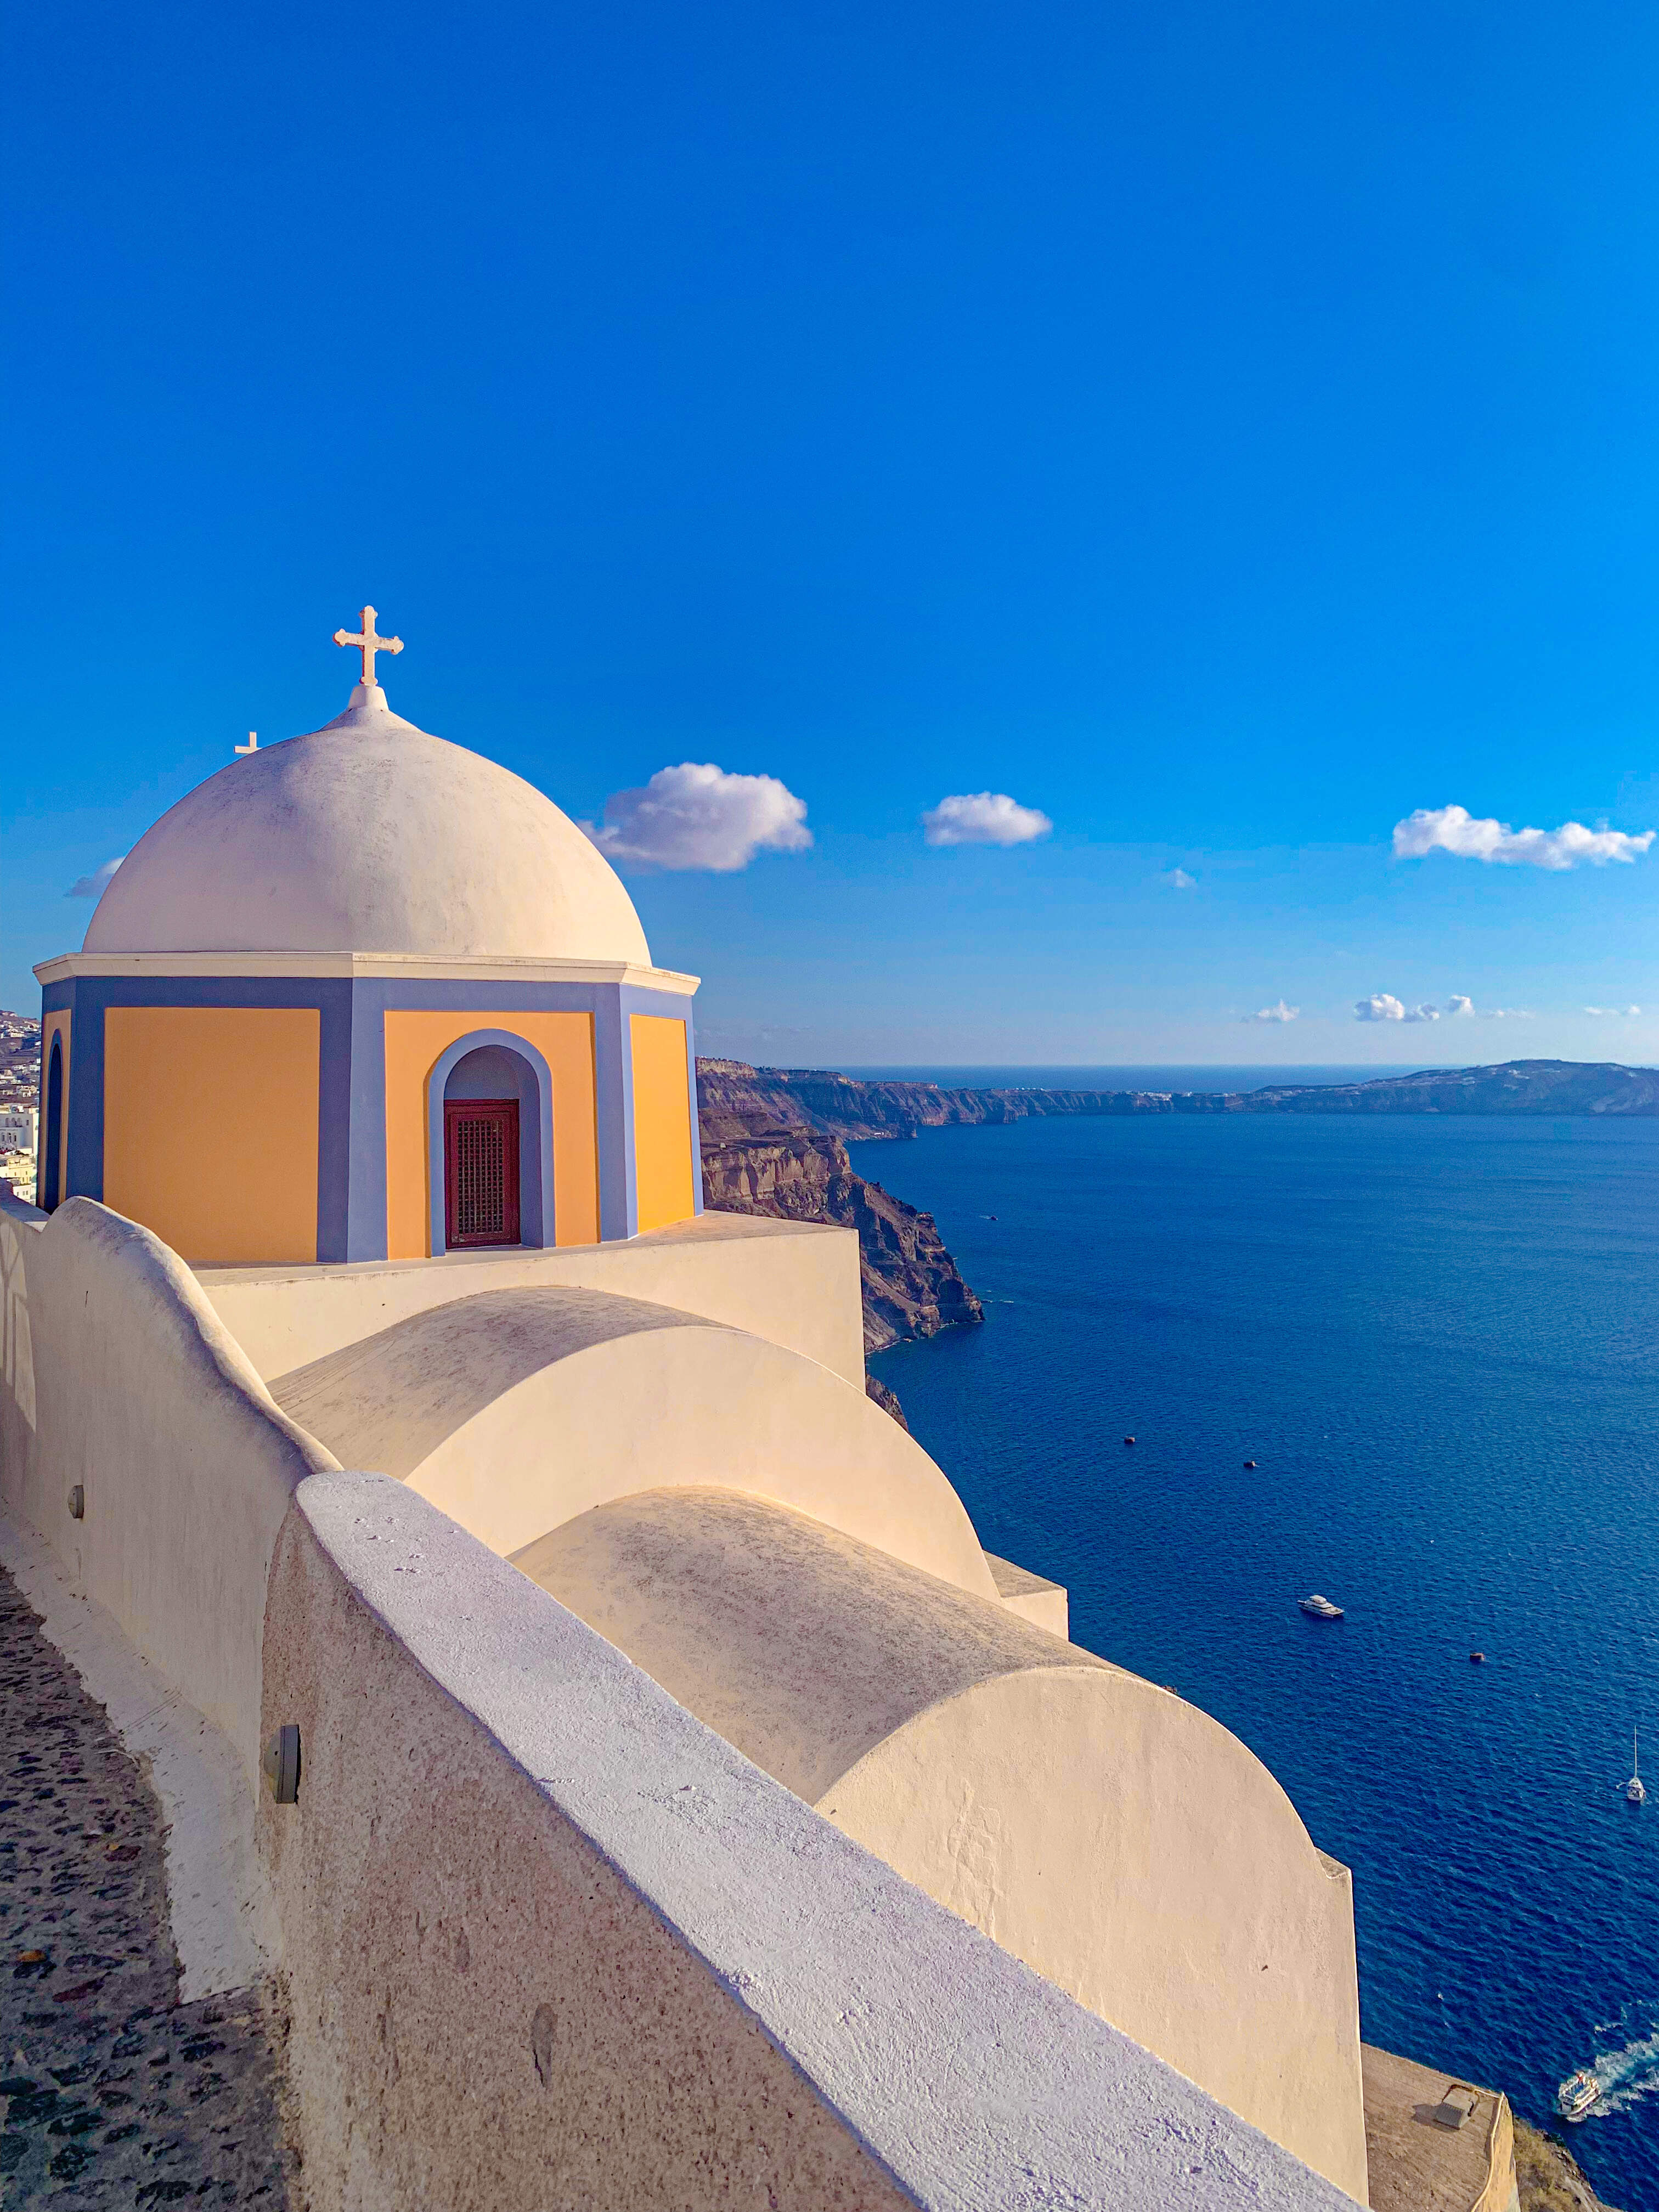 Can you not make this photo, when in Santorini?